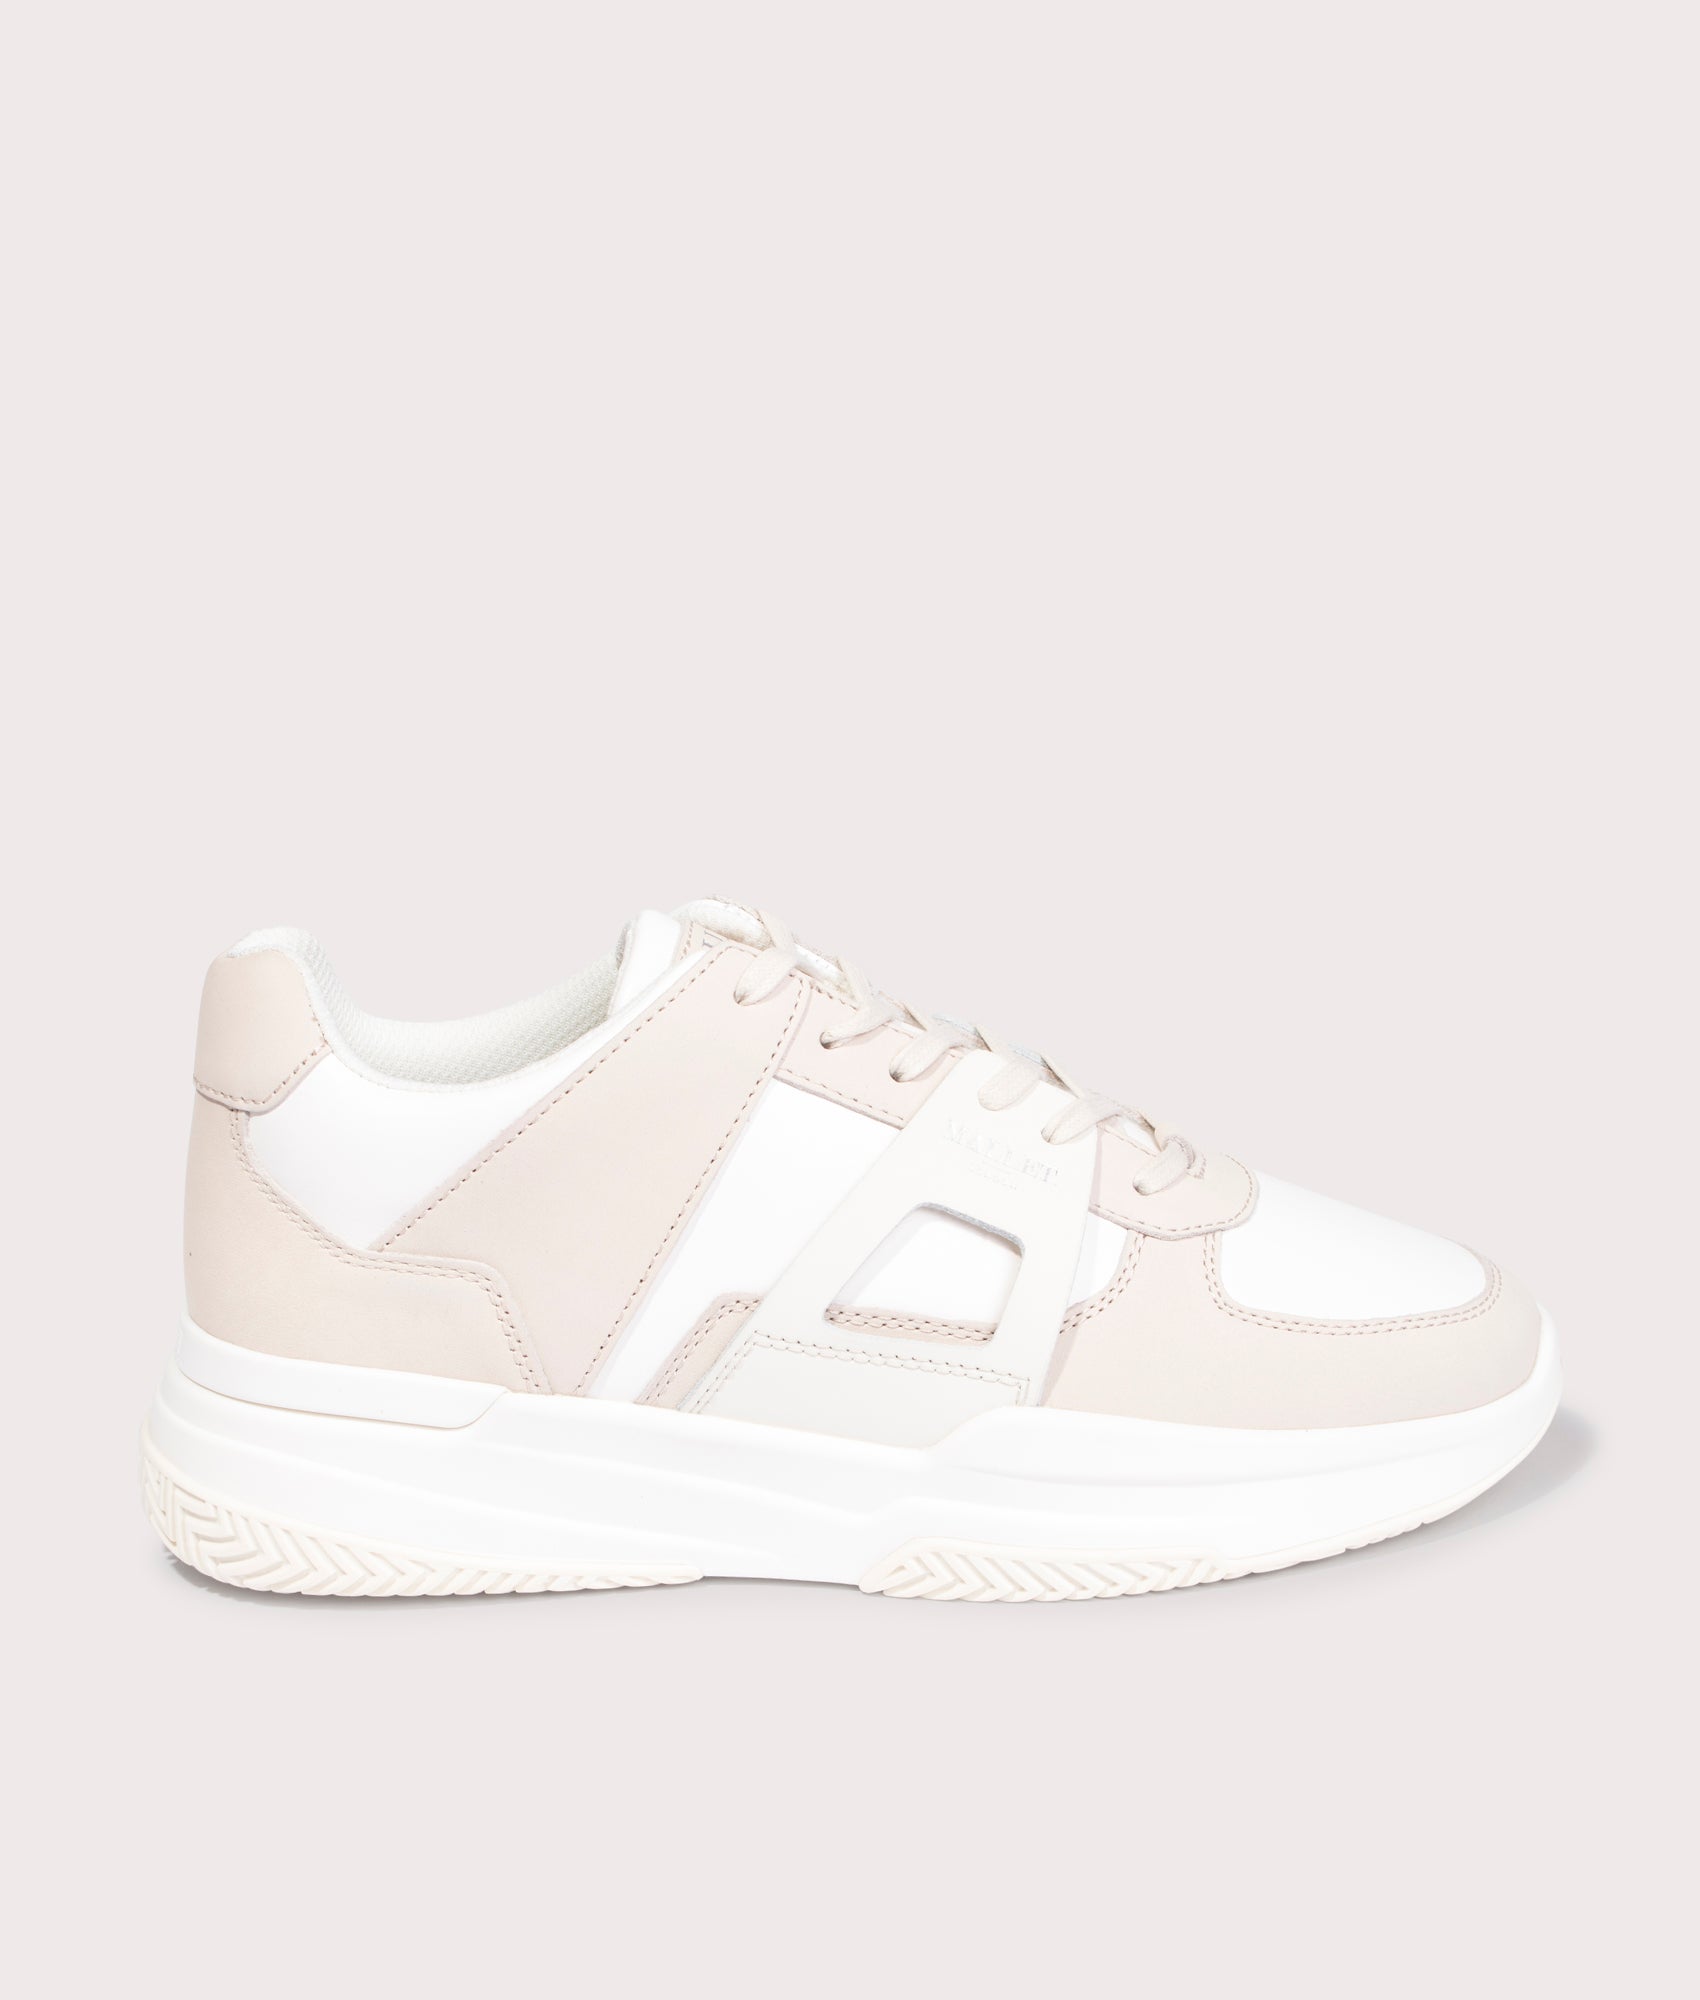 Mallet Mens Marquess Sneakers - Colour: OFWTAU Off-White Taupe - Size: 8